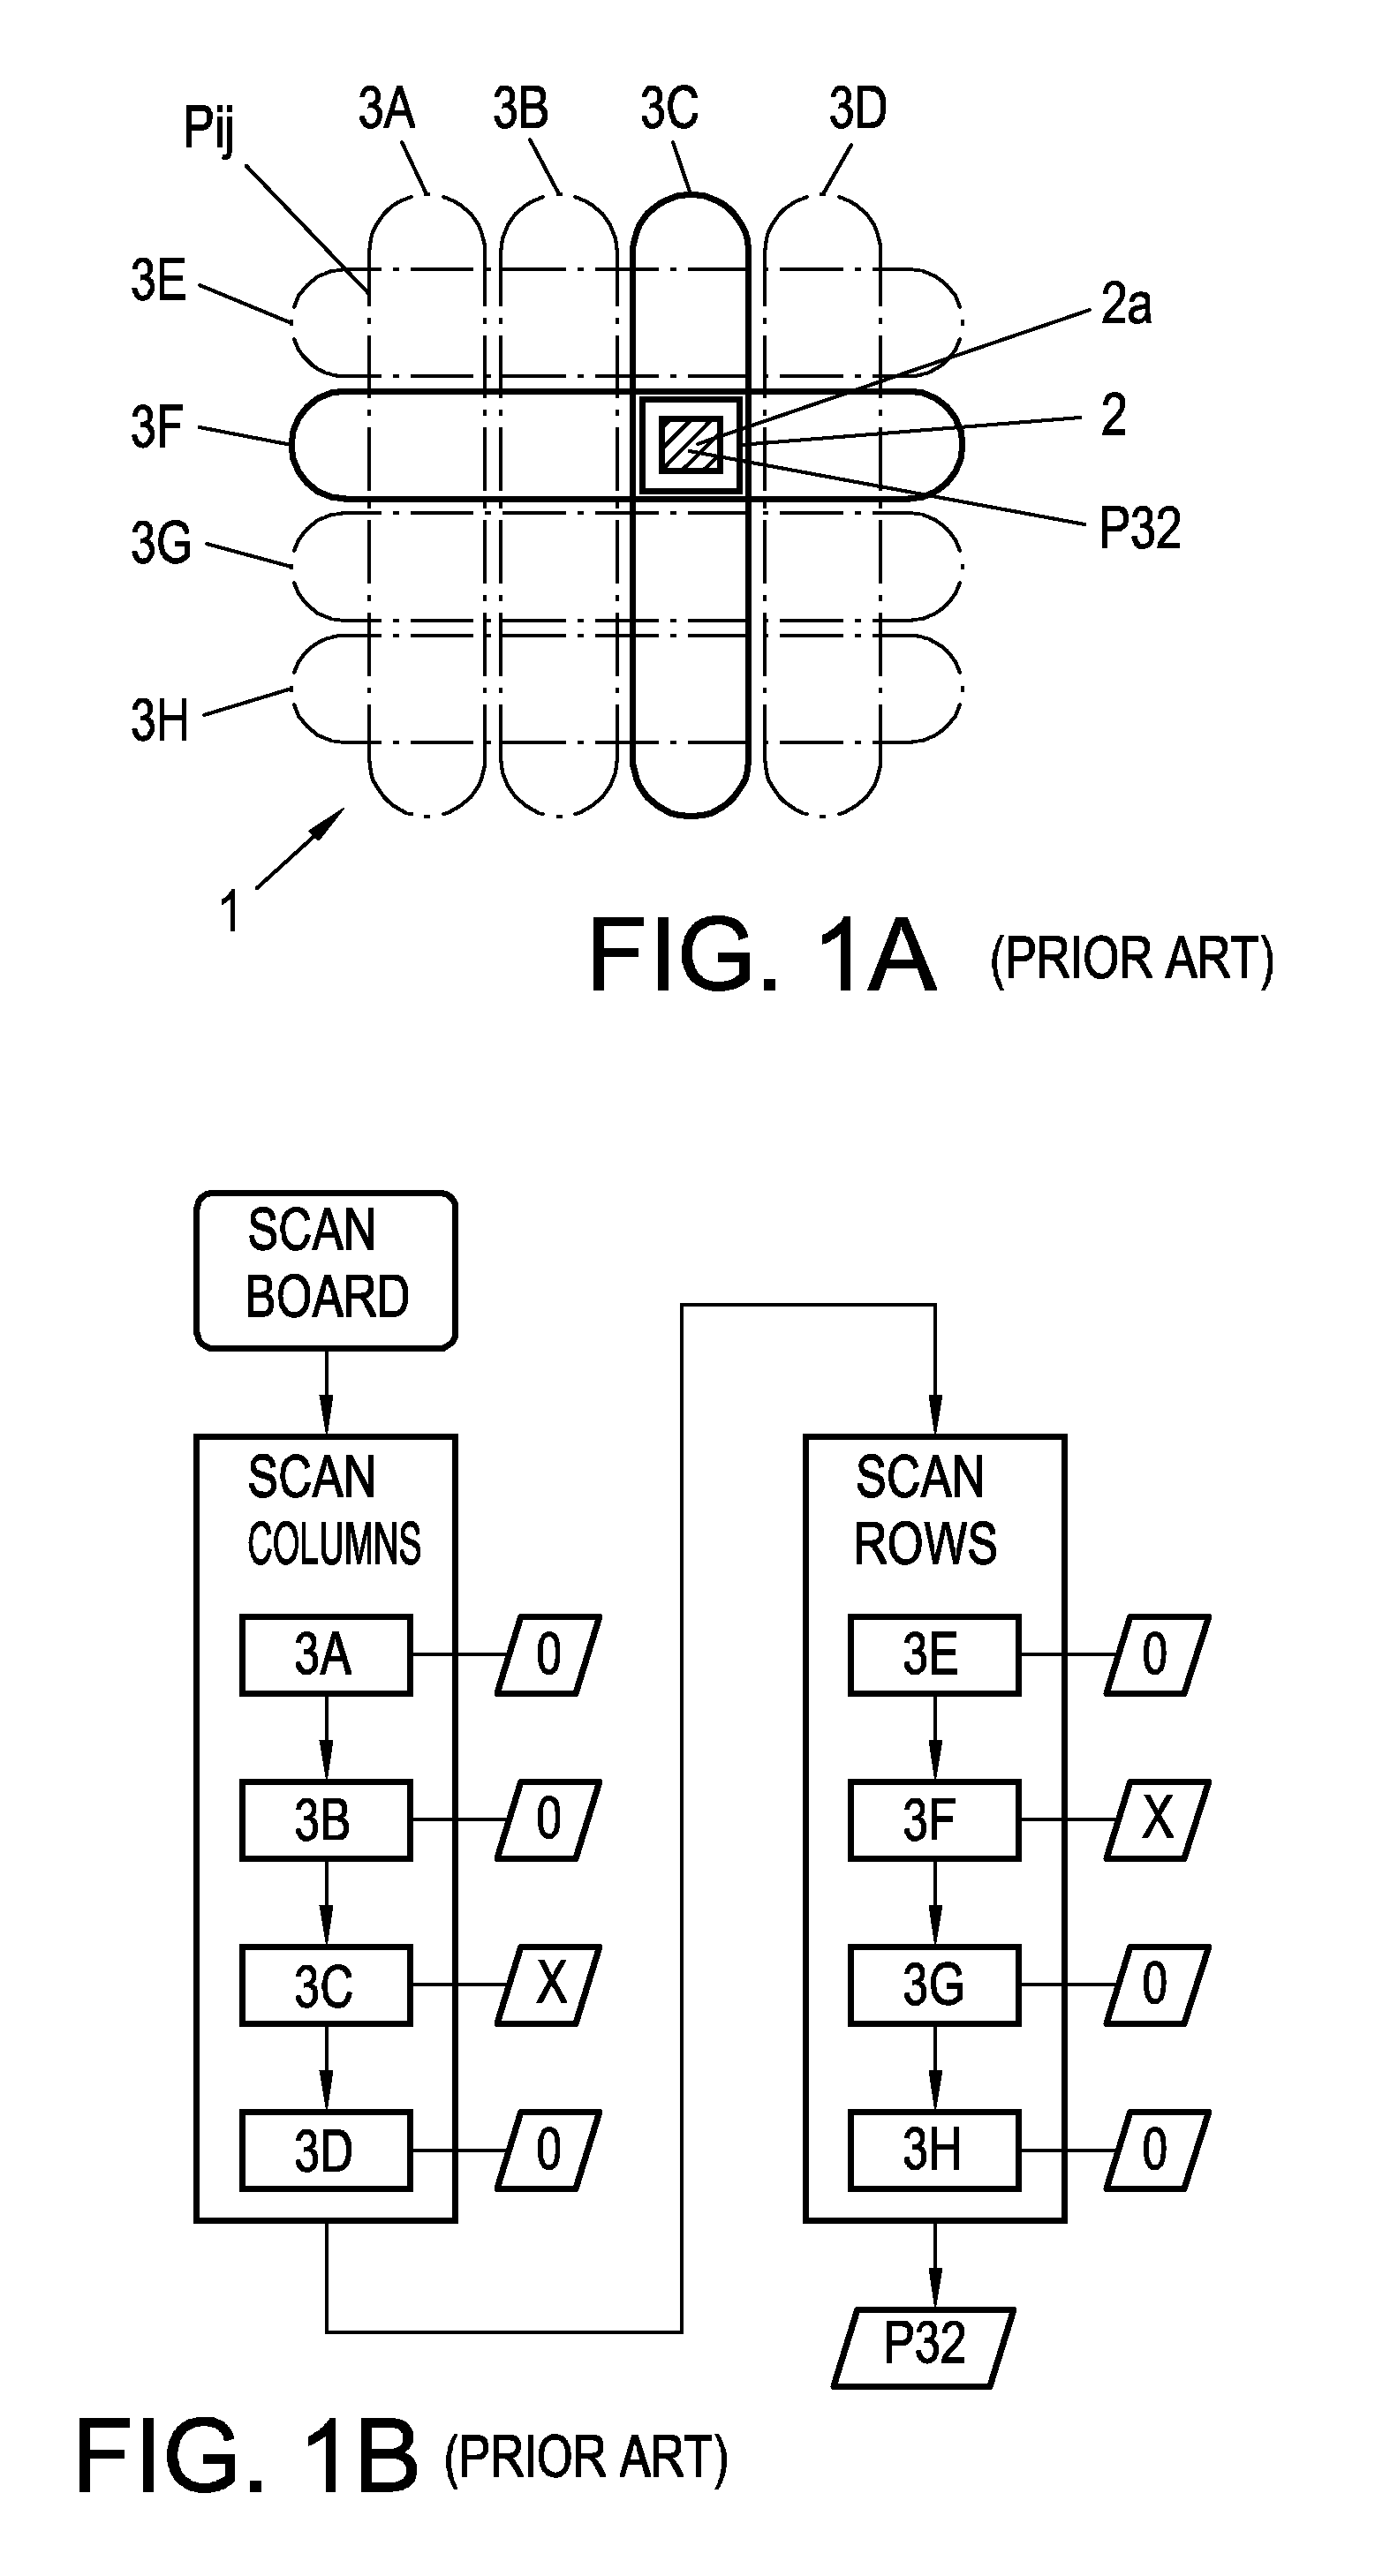 System for Sensing a Physical Property in a Plurality of Scanning Positions